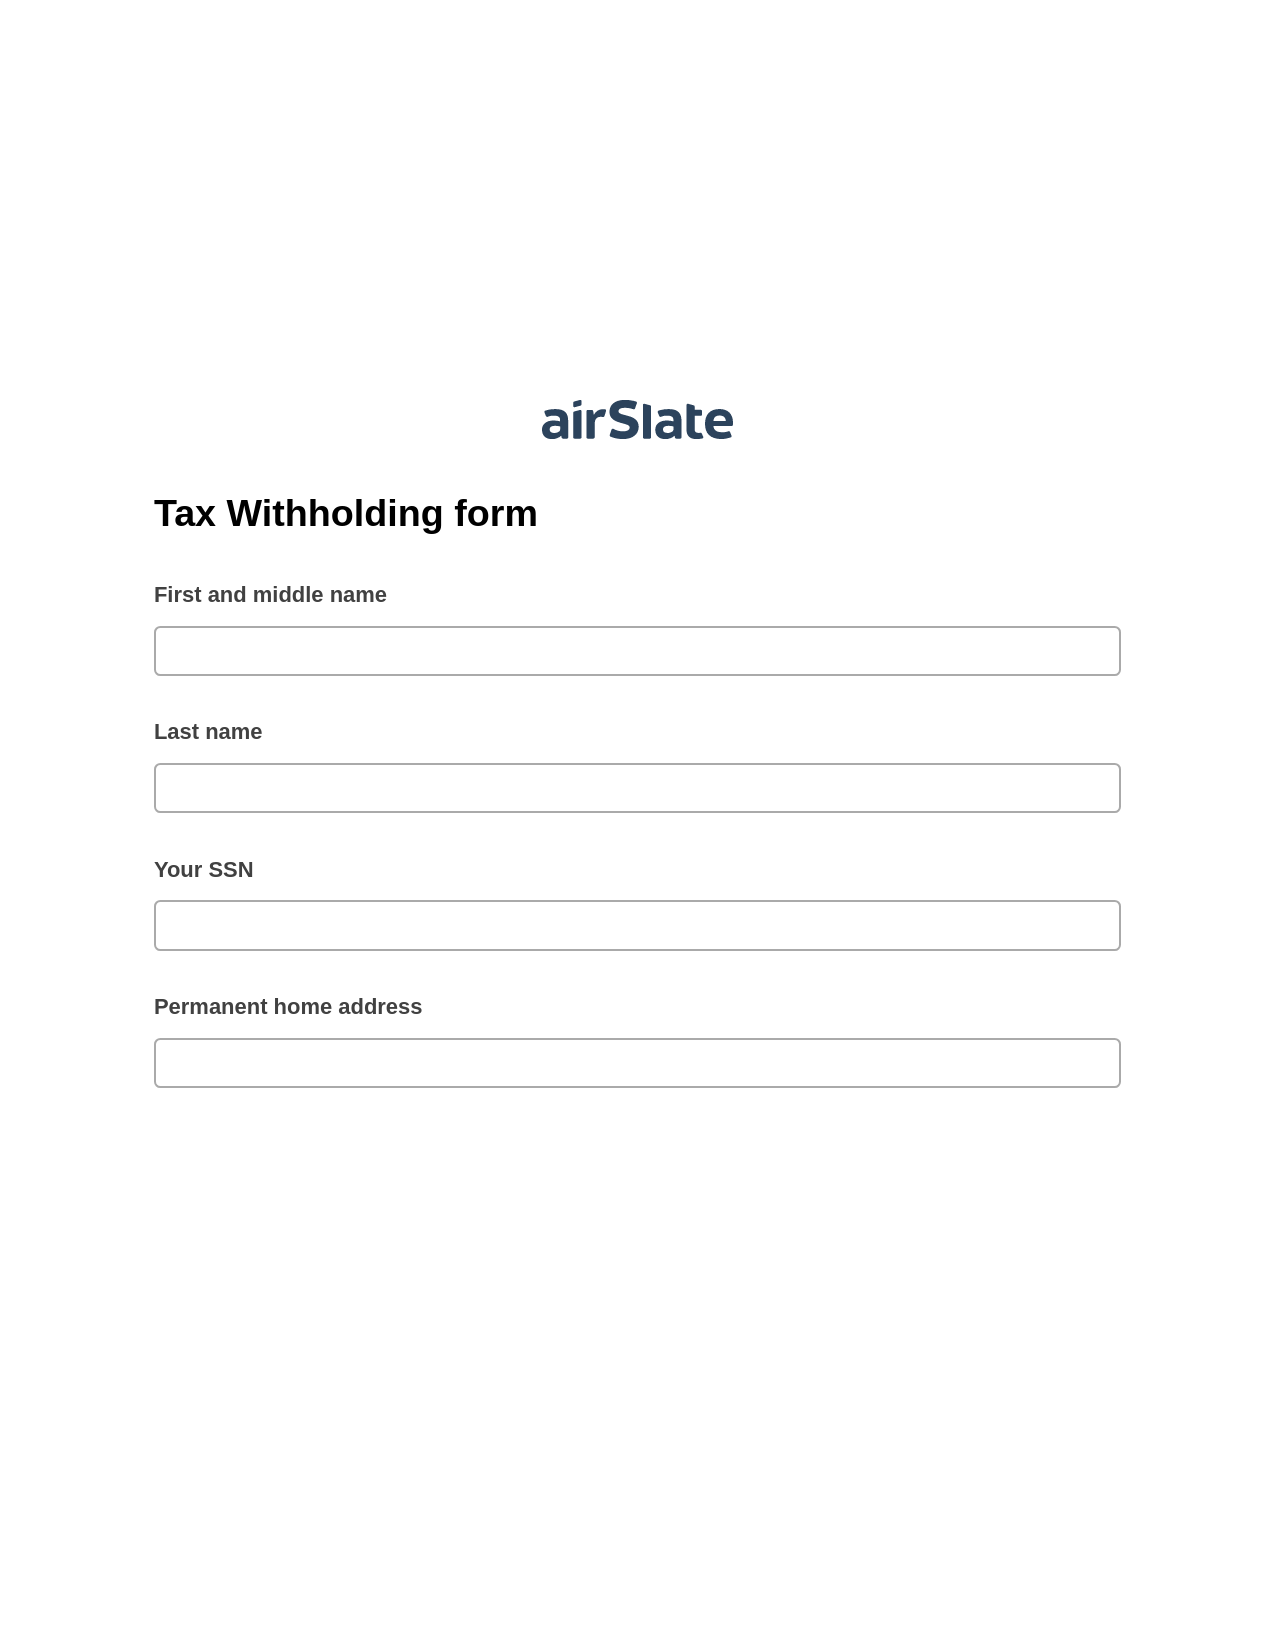 Multirole Tax Withholding form Pre-fill from CSV File Bot, SendGrid Send Campaign Bot, Archive to SharePoint Folder Bot